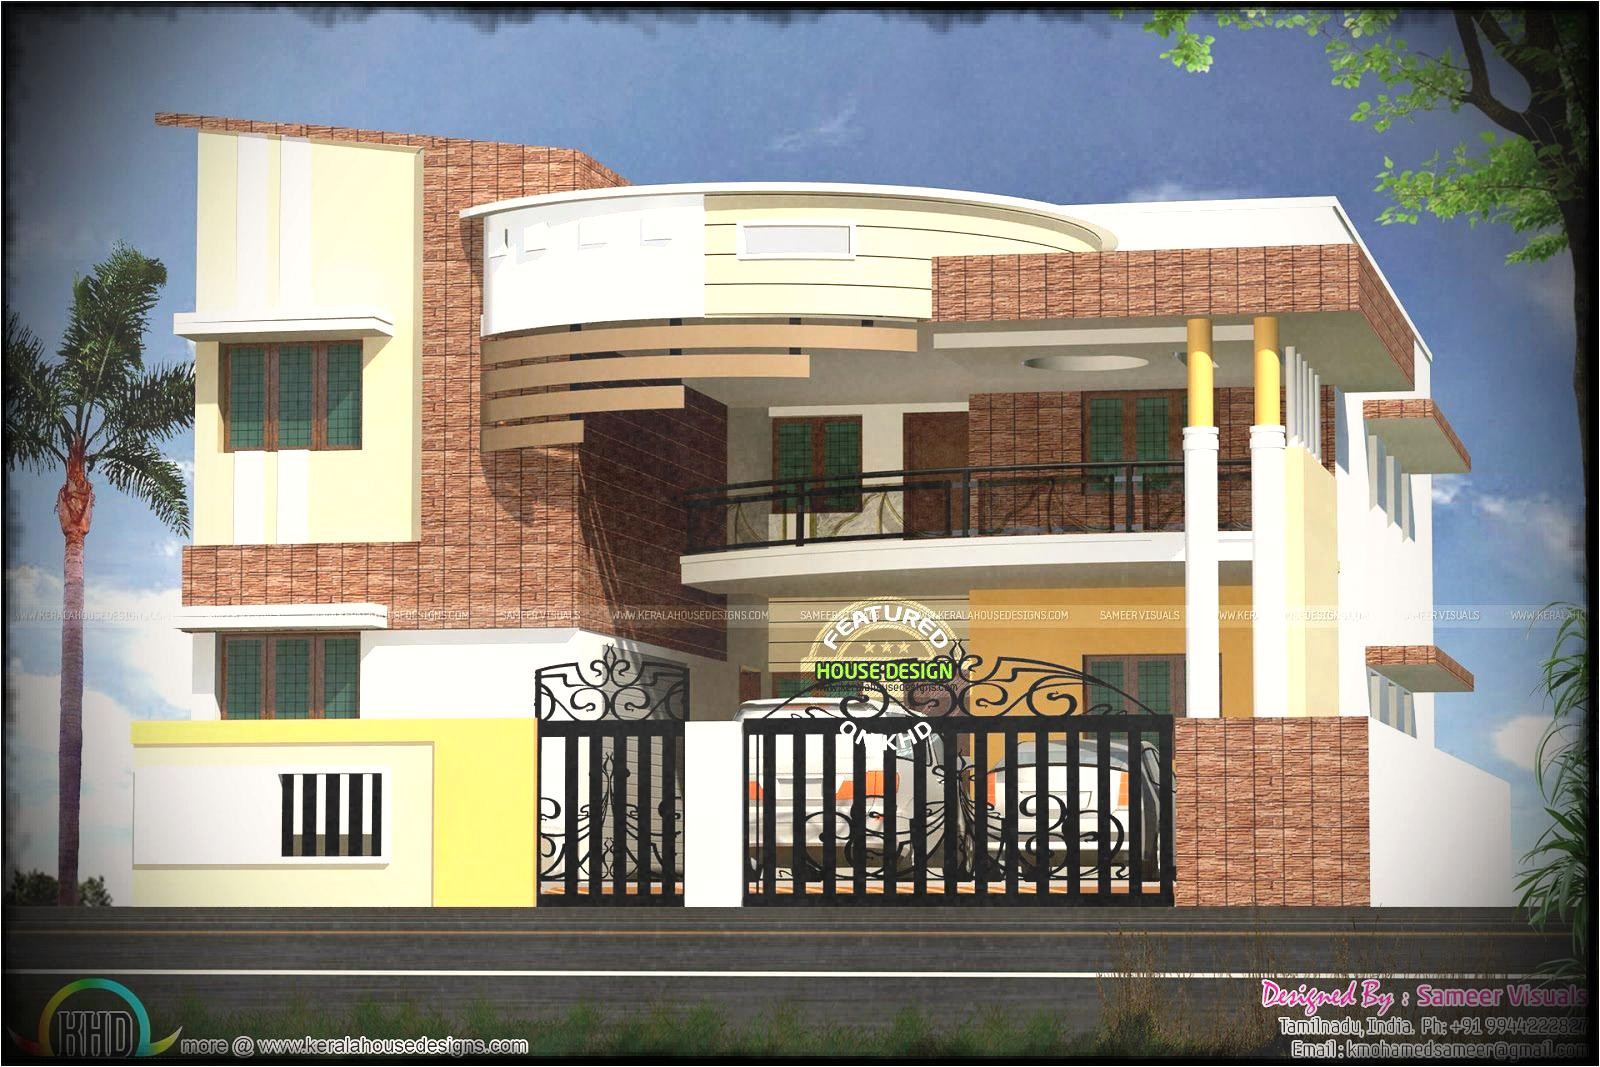 south indian home designs and plans best of emejing south indian home designs and plans s interior ideas